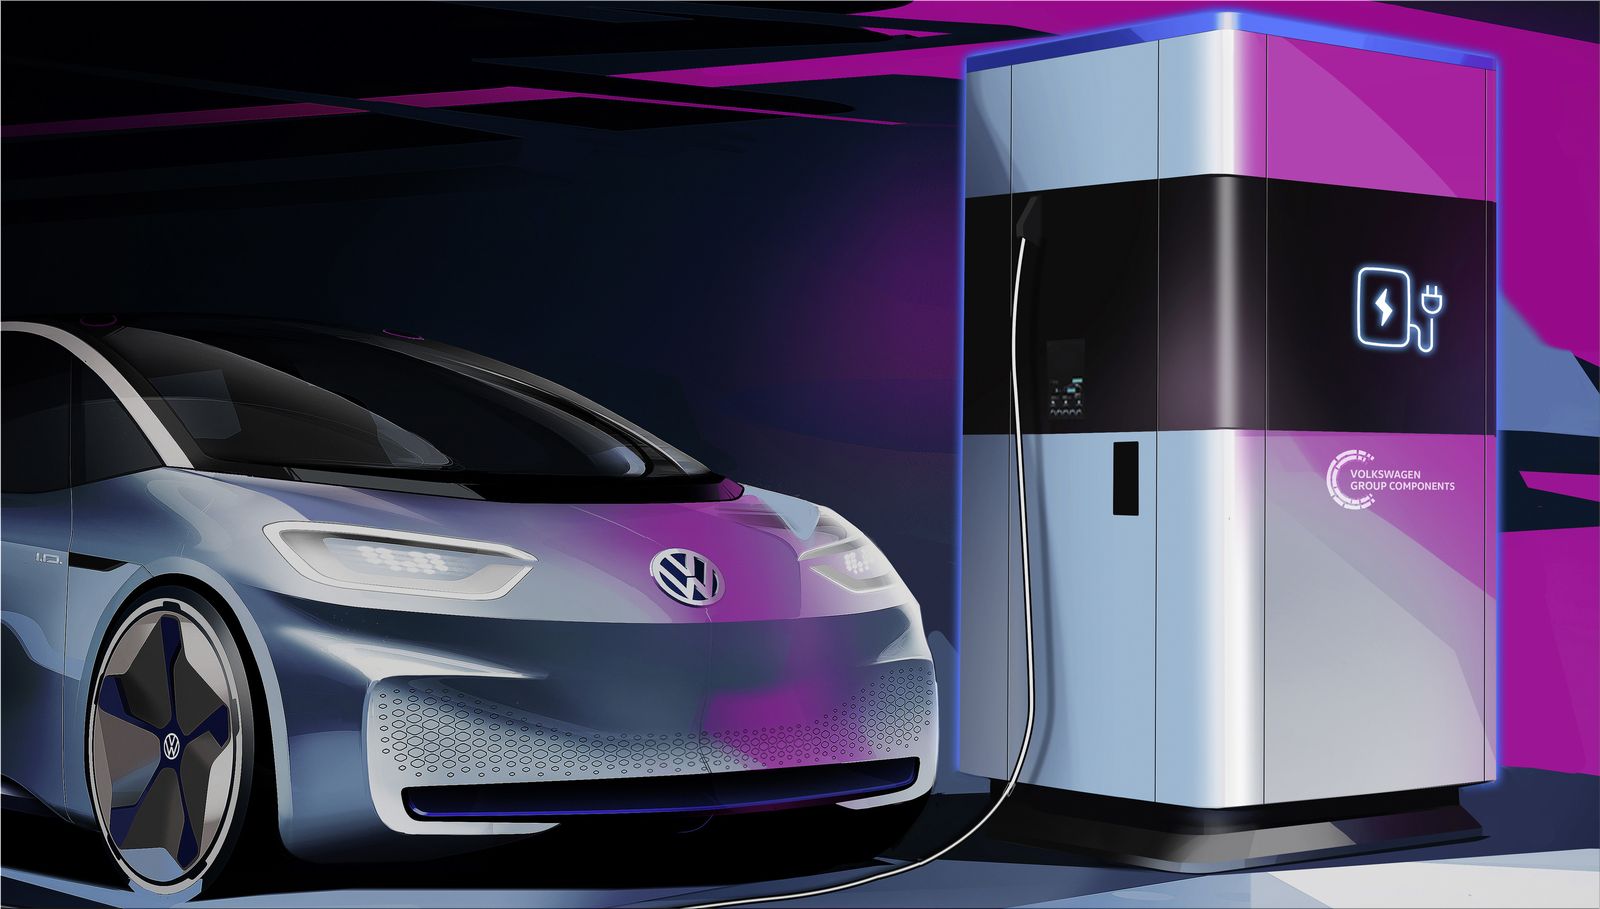 Volkswagen will install 4,000 electric car charging stations | Electric